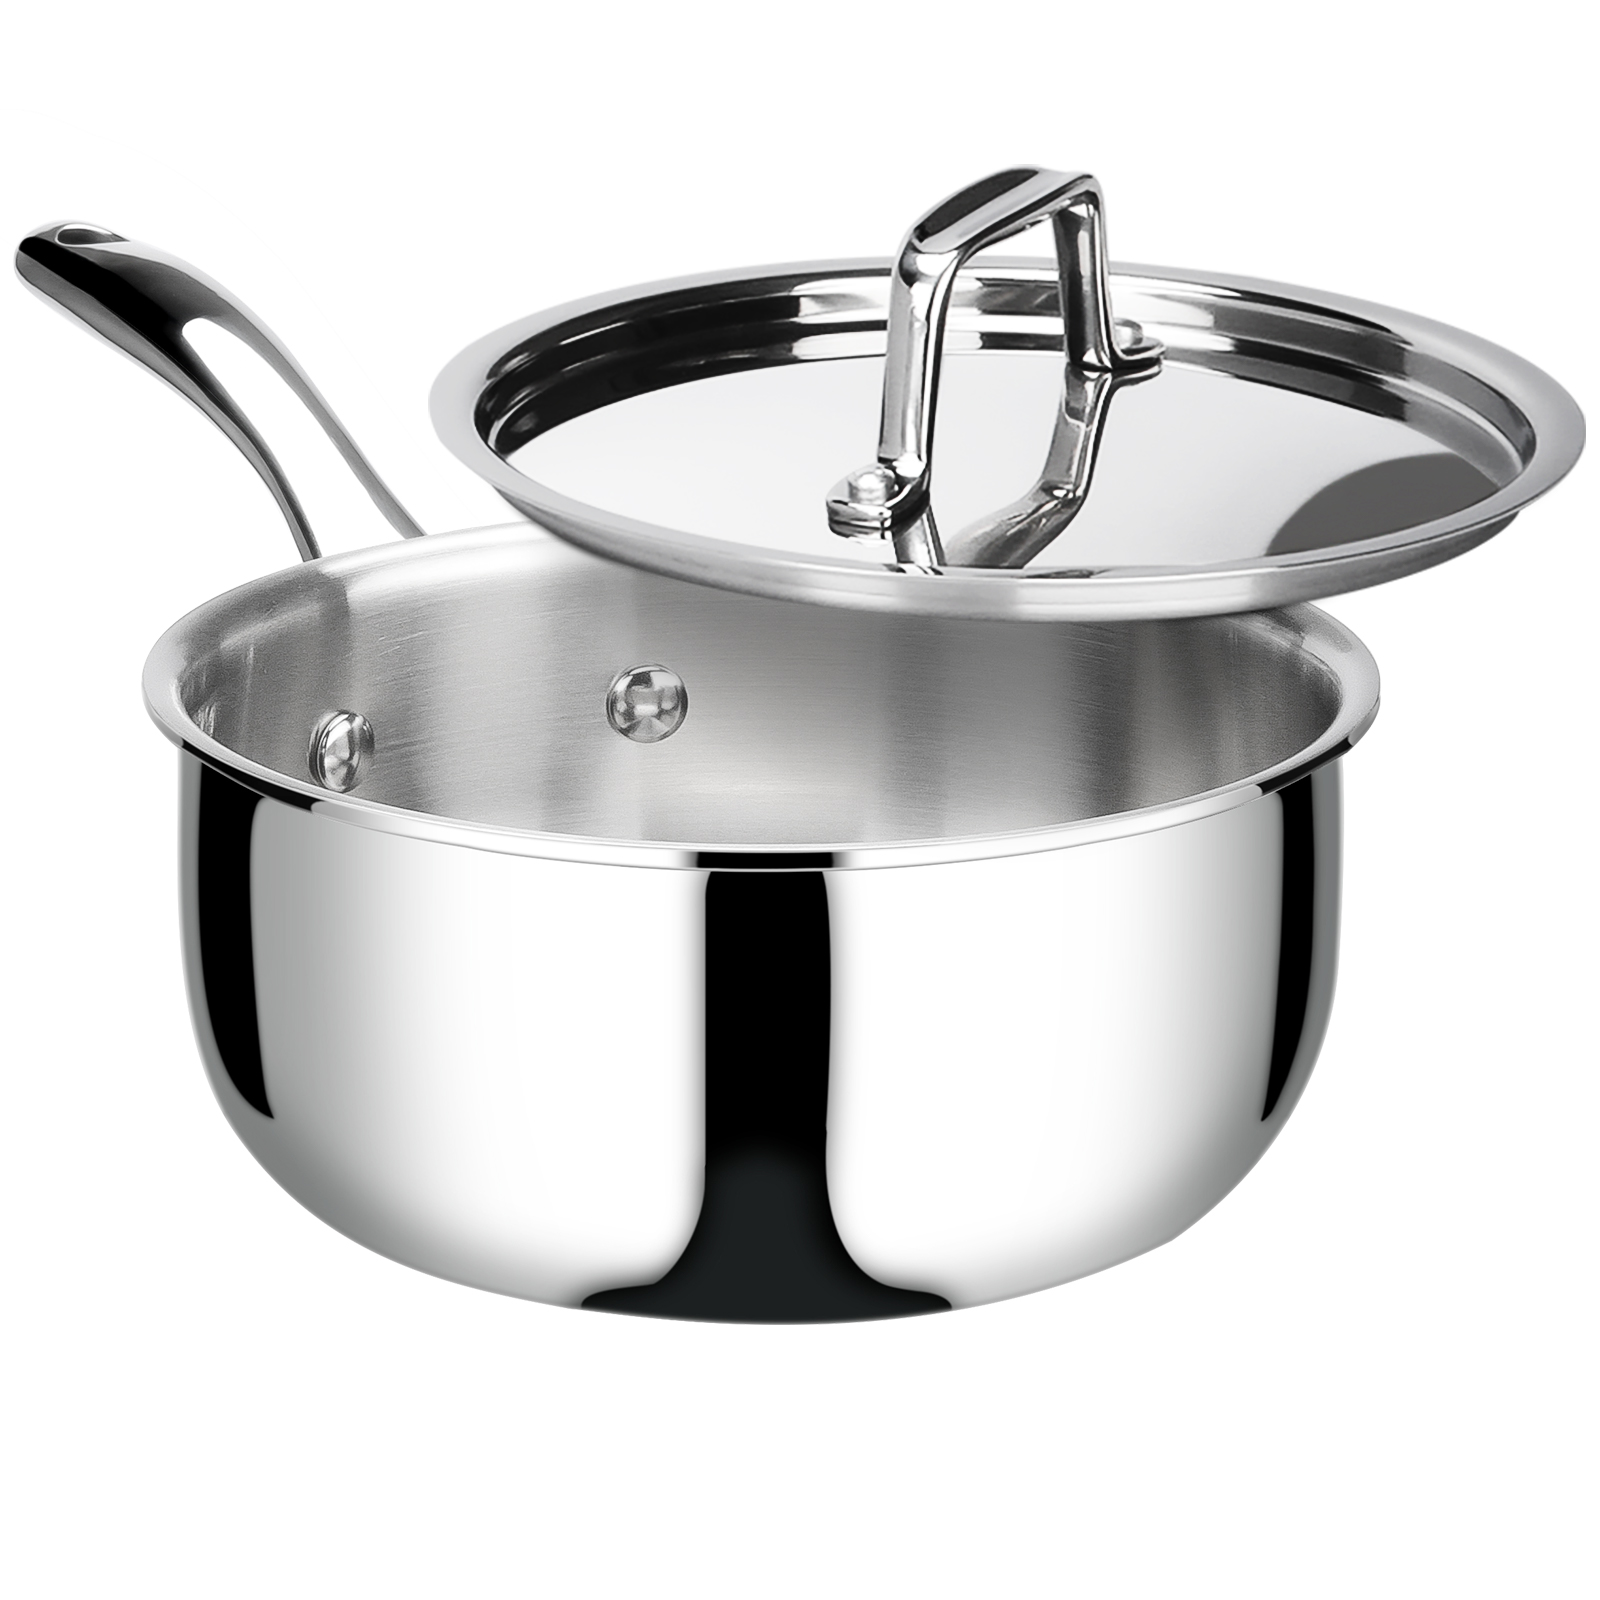  Duxtop Whole-Clad Tri-Ply Stainless Steel Saute Pan with Lid, 3  Quart, Kitchen Induction Cookware: Home & Kitchen